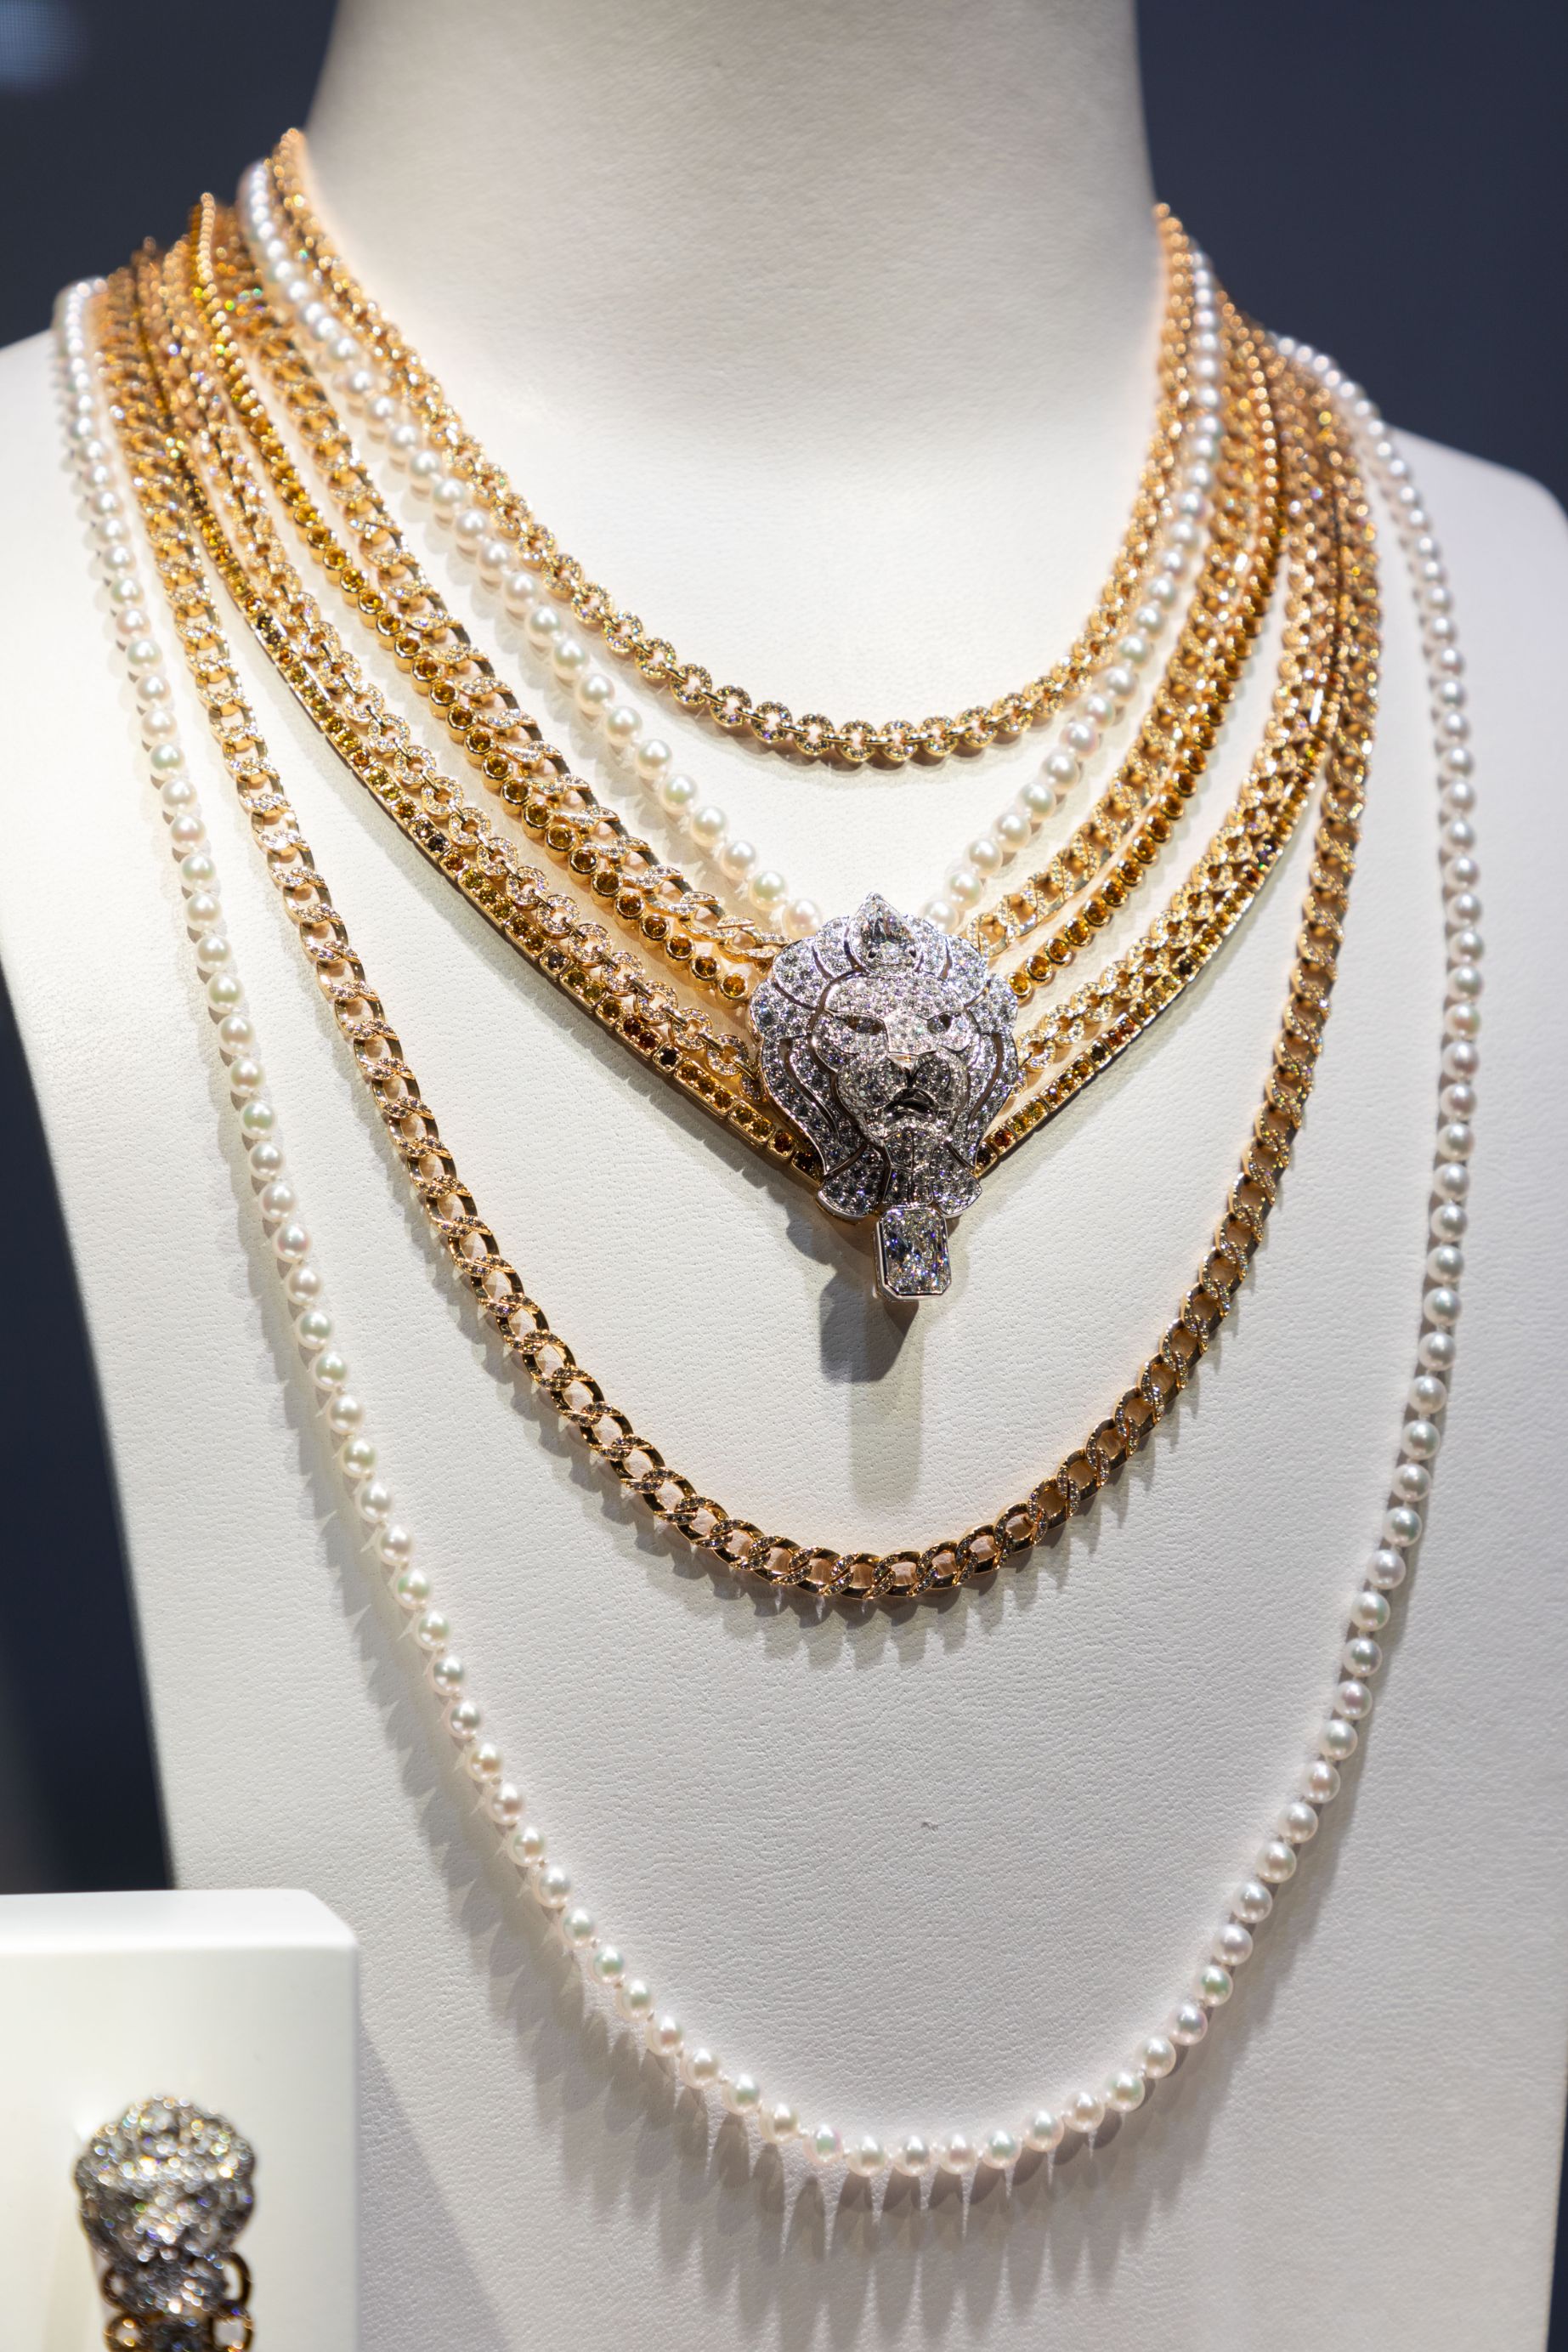 Chanel Brings Paris to Hong Kong With High Jewellery Presentation